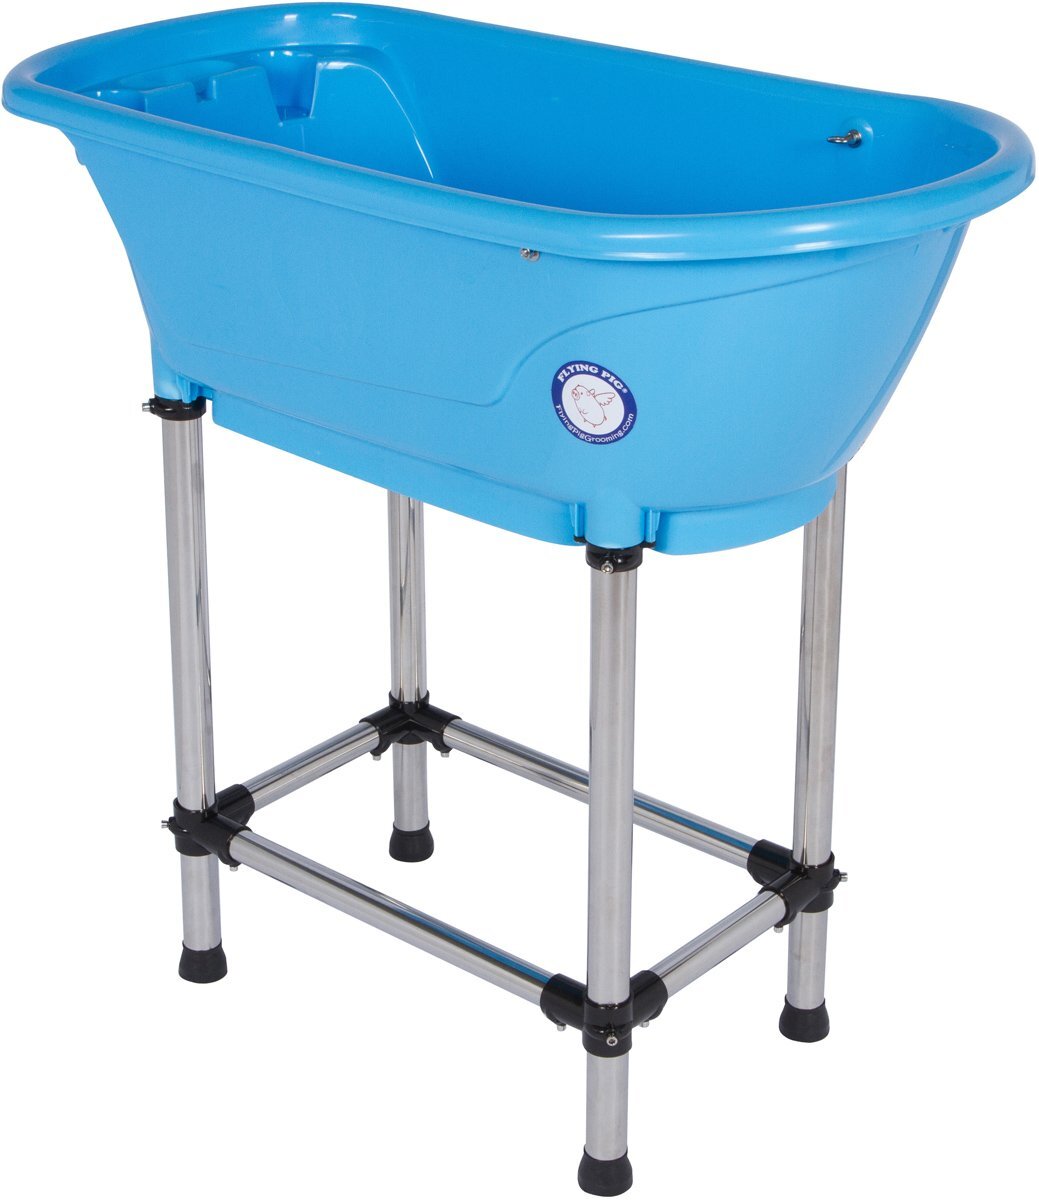 Small Portable Bath Tub For Dogs and Cats (Blue) Dog Pet Grooming | eBay